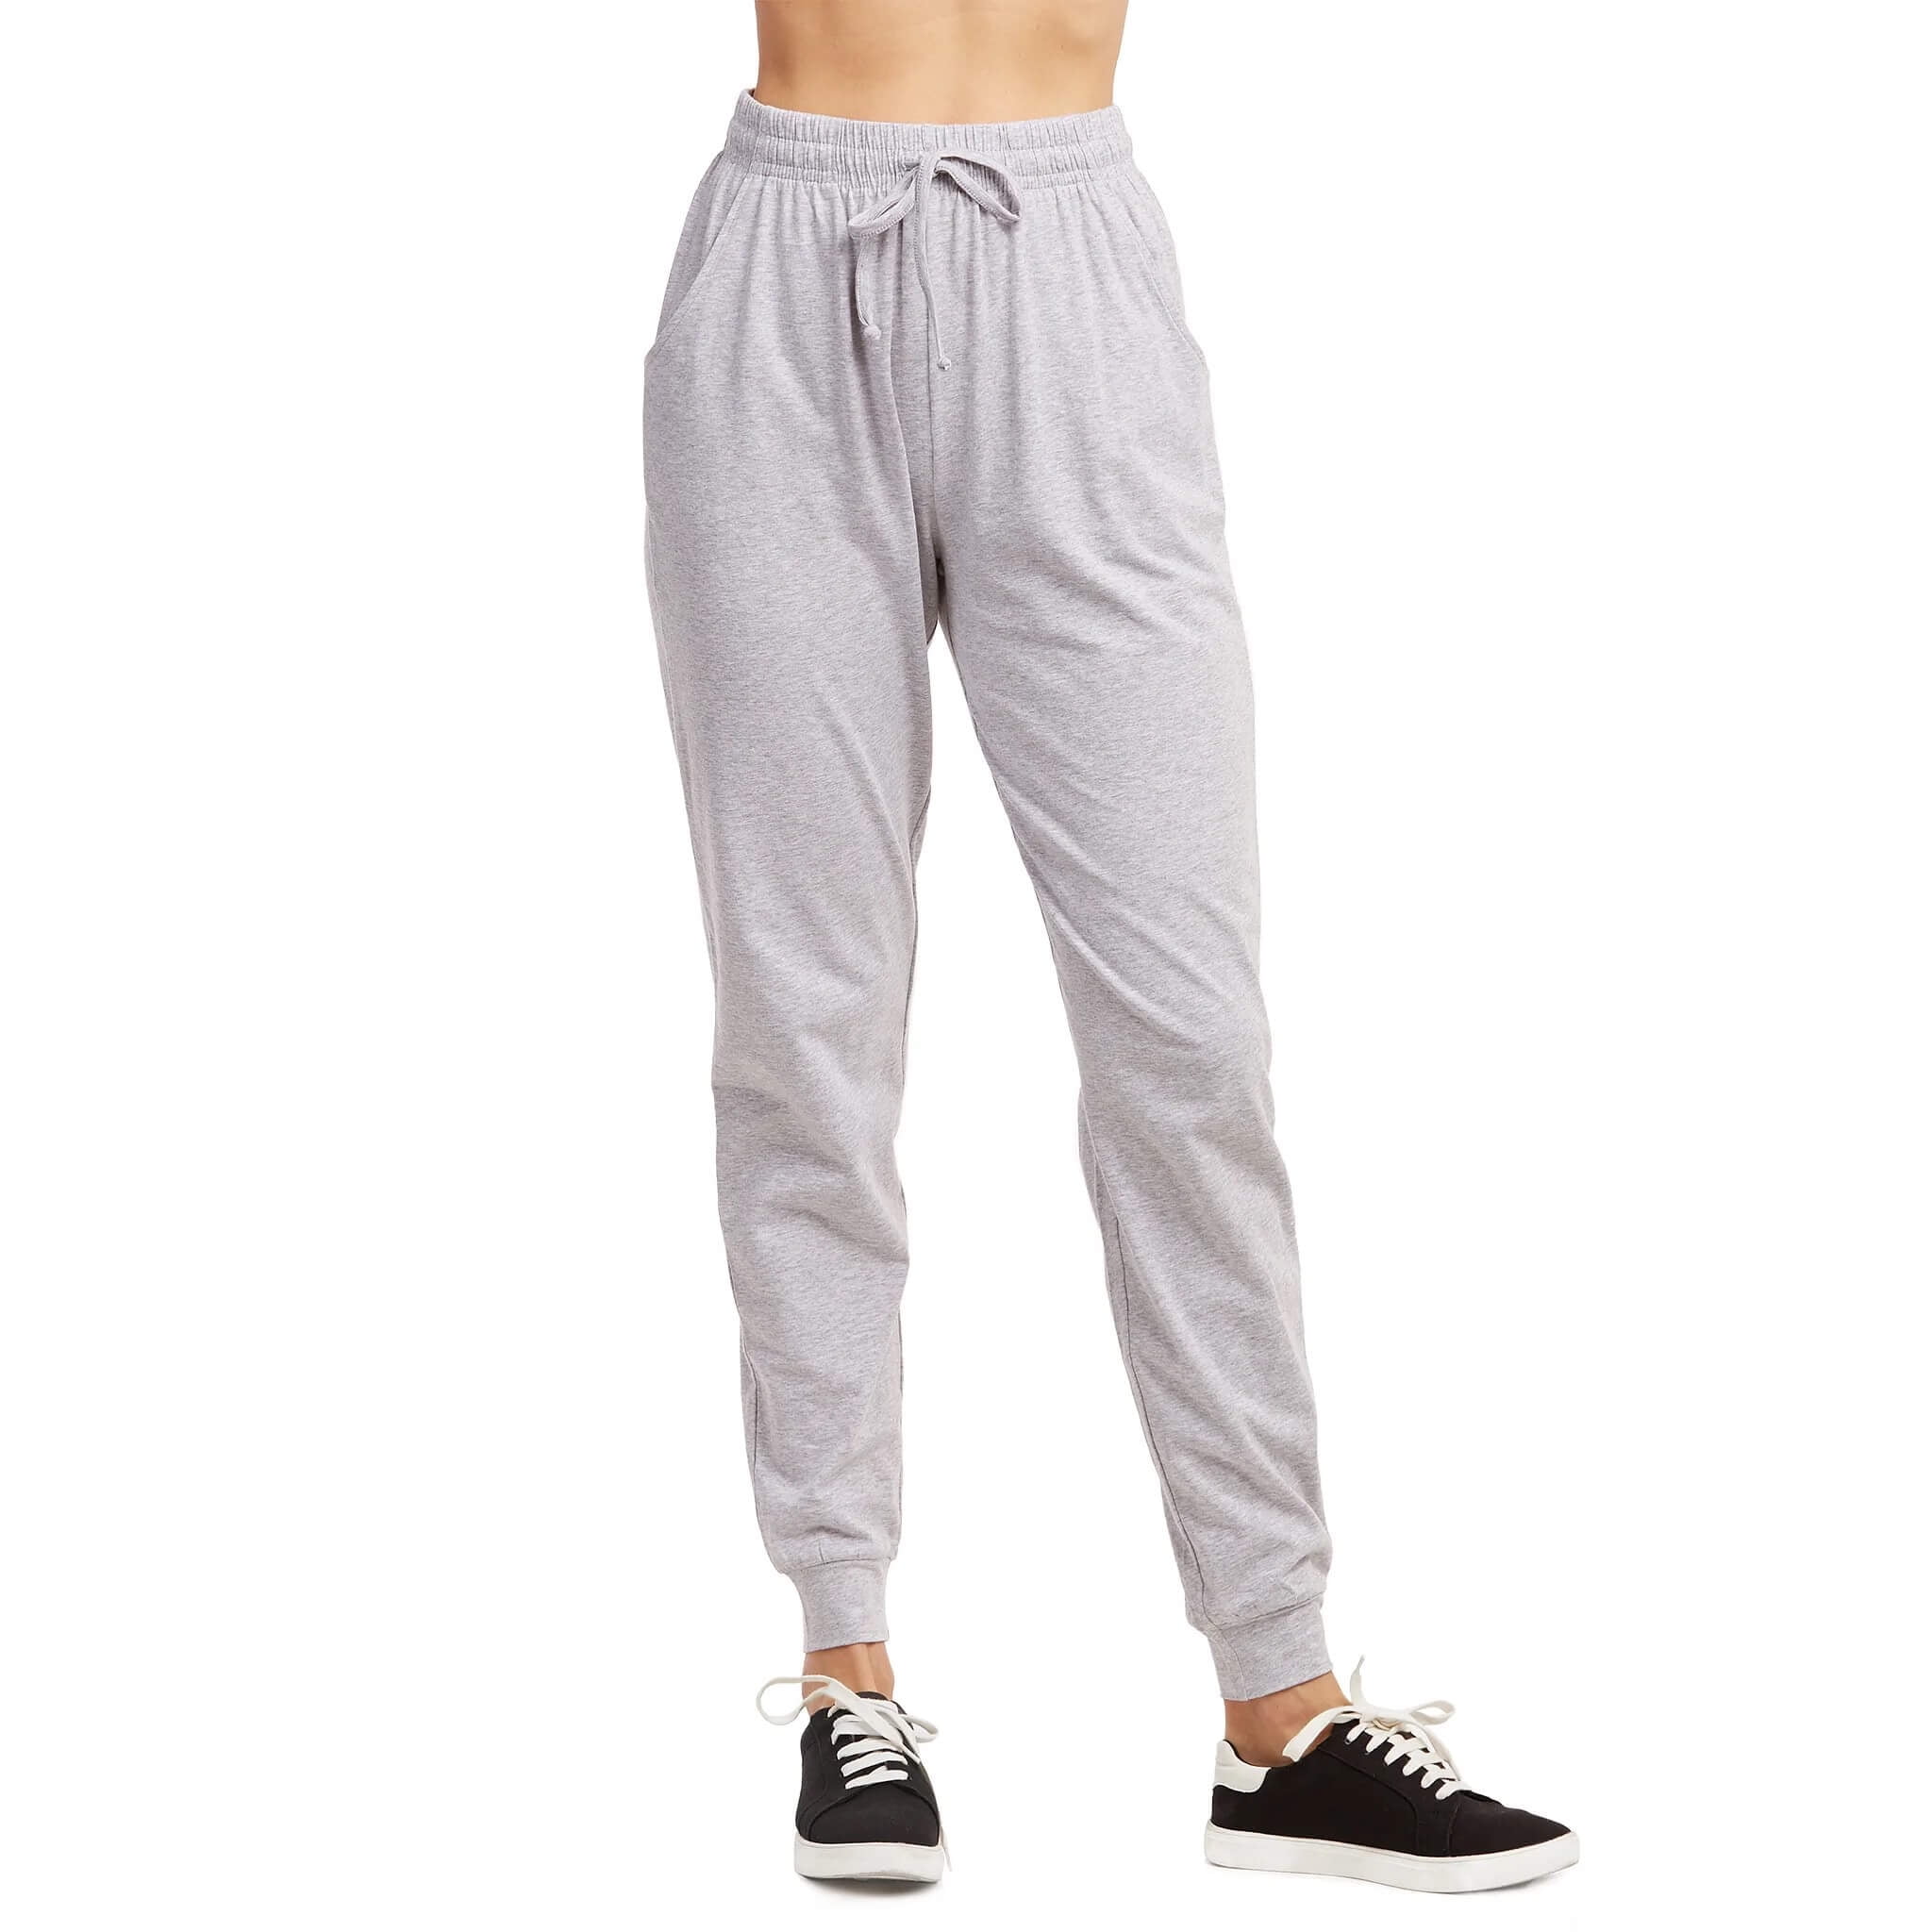 12 Pieces Ladies Single Jersey Cotton Jogger Pants With Pockets In